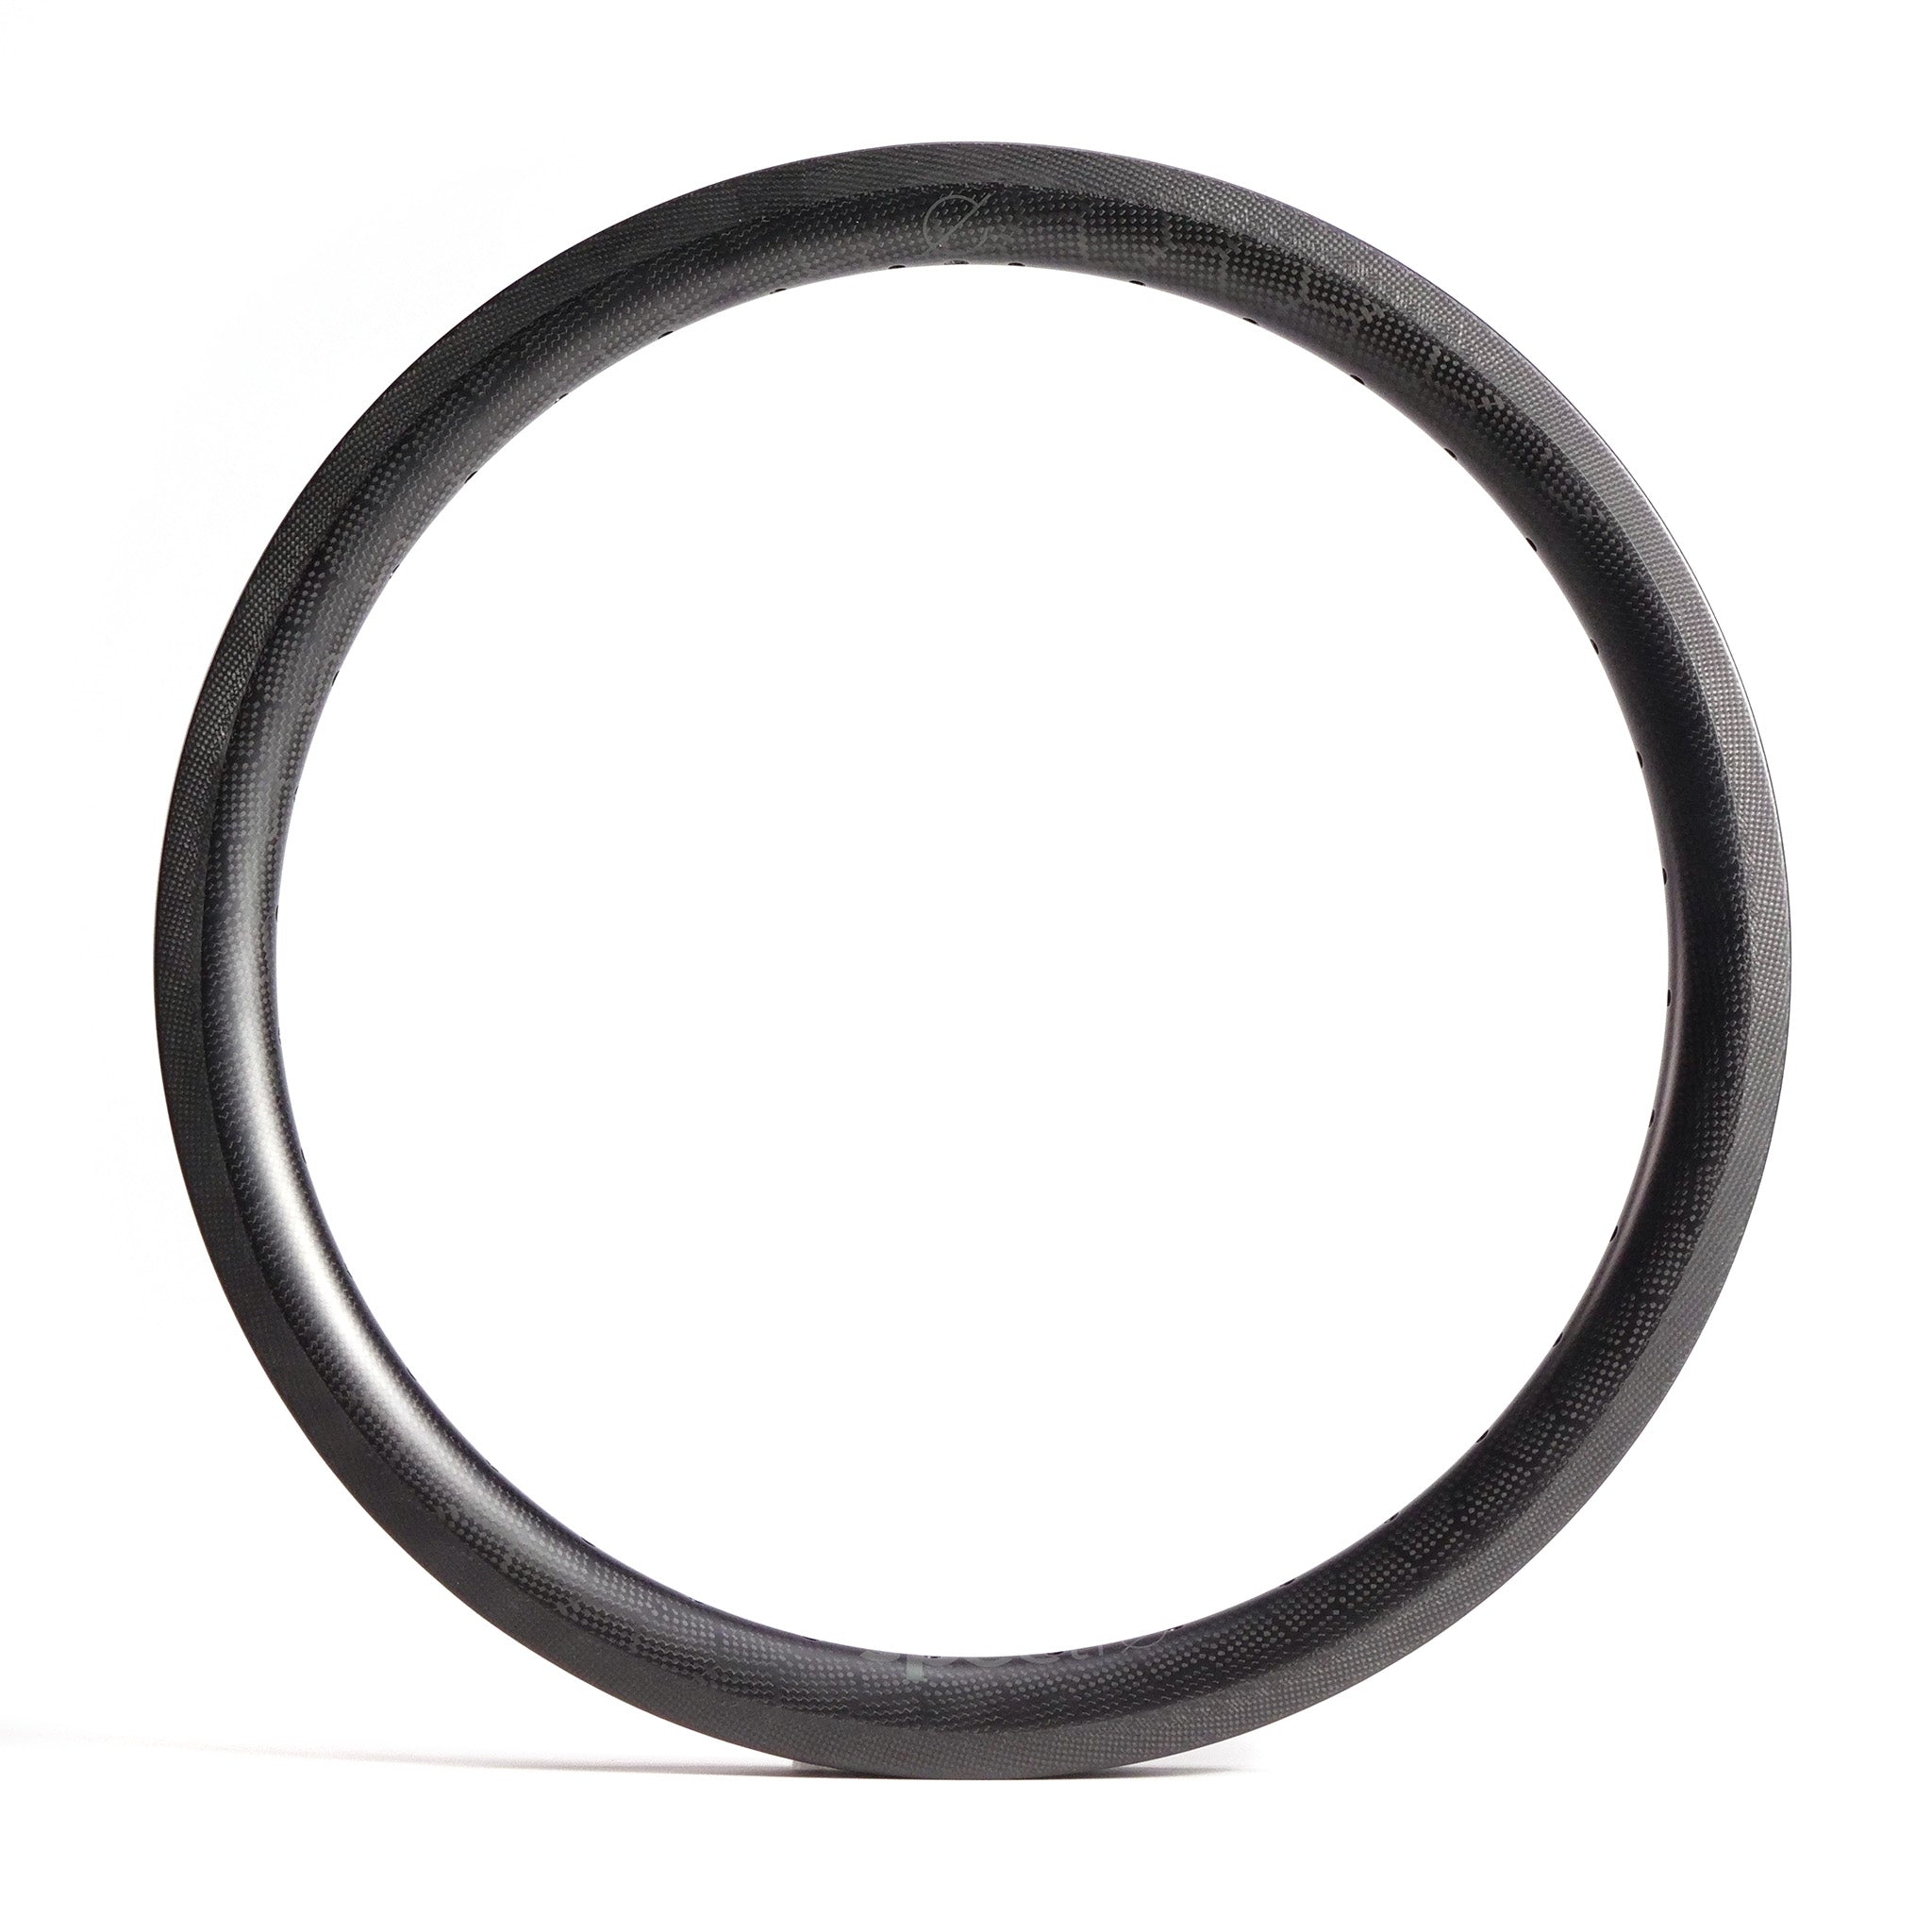 A Spectre V2 Carbon Fibre 20 Inch Brake Rim with a carbon fiber finish and 4D drilled holes, shown against a plain white background.